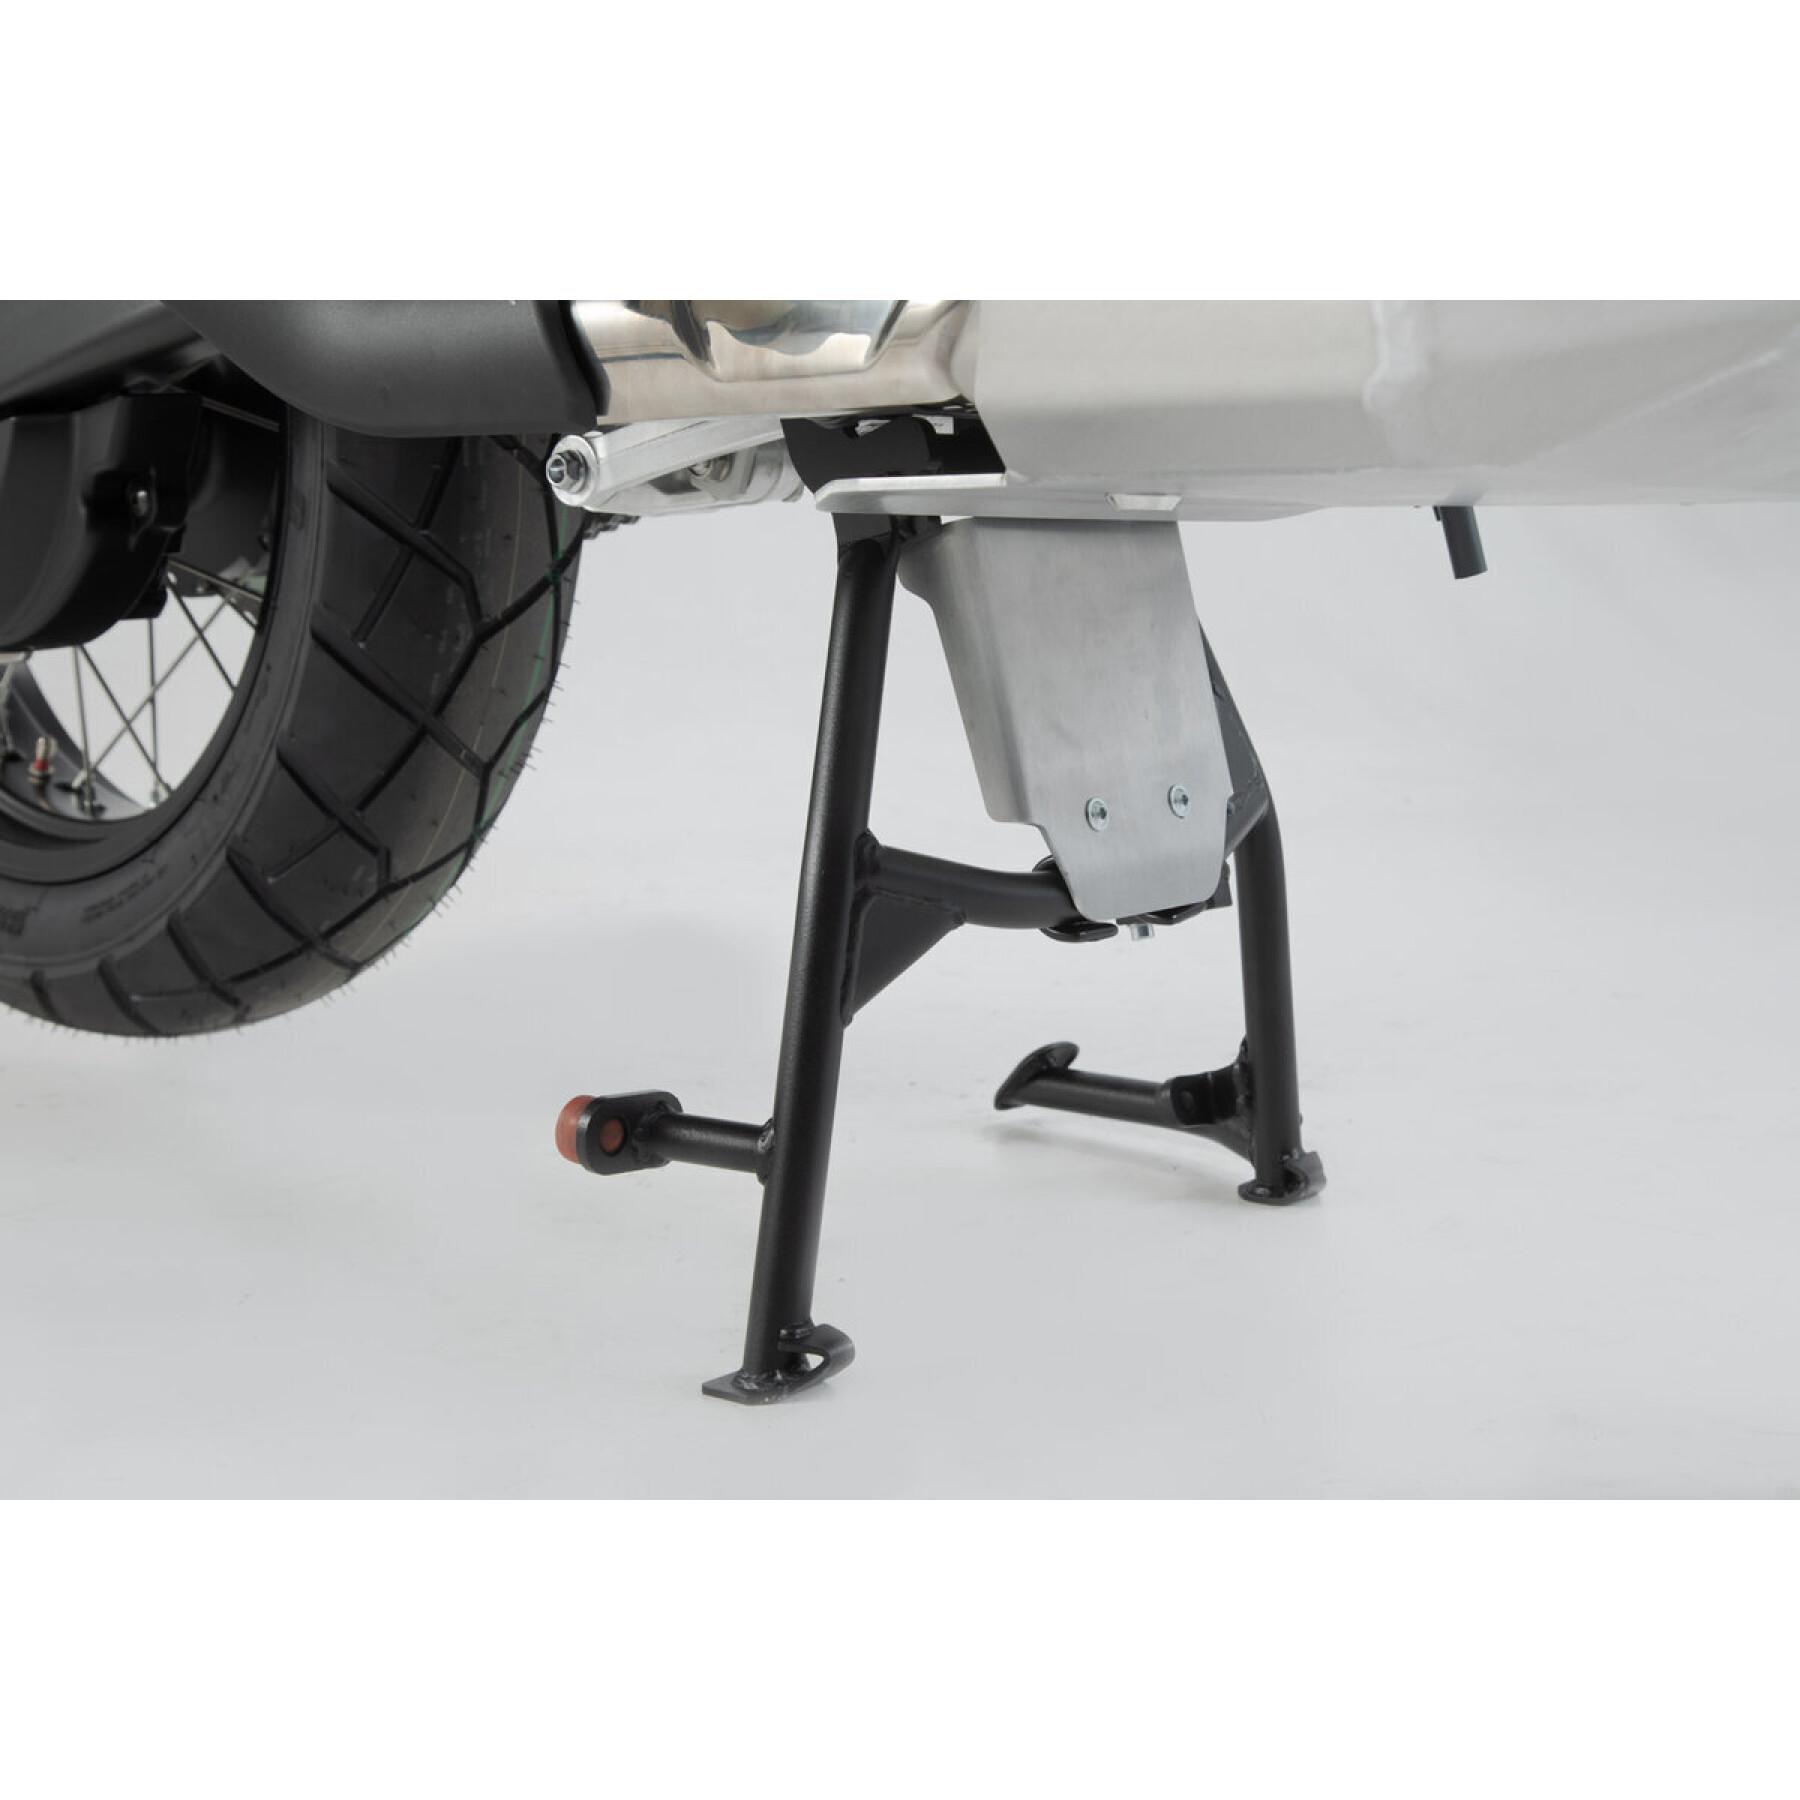 Center stand SW-Motech CRF1100L Africa Twin / Adv Sports (19-)